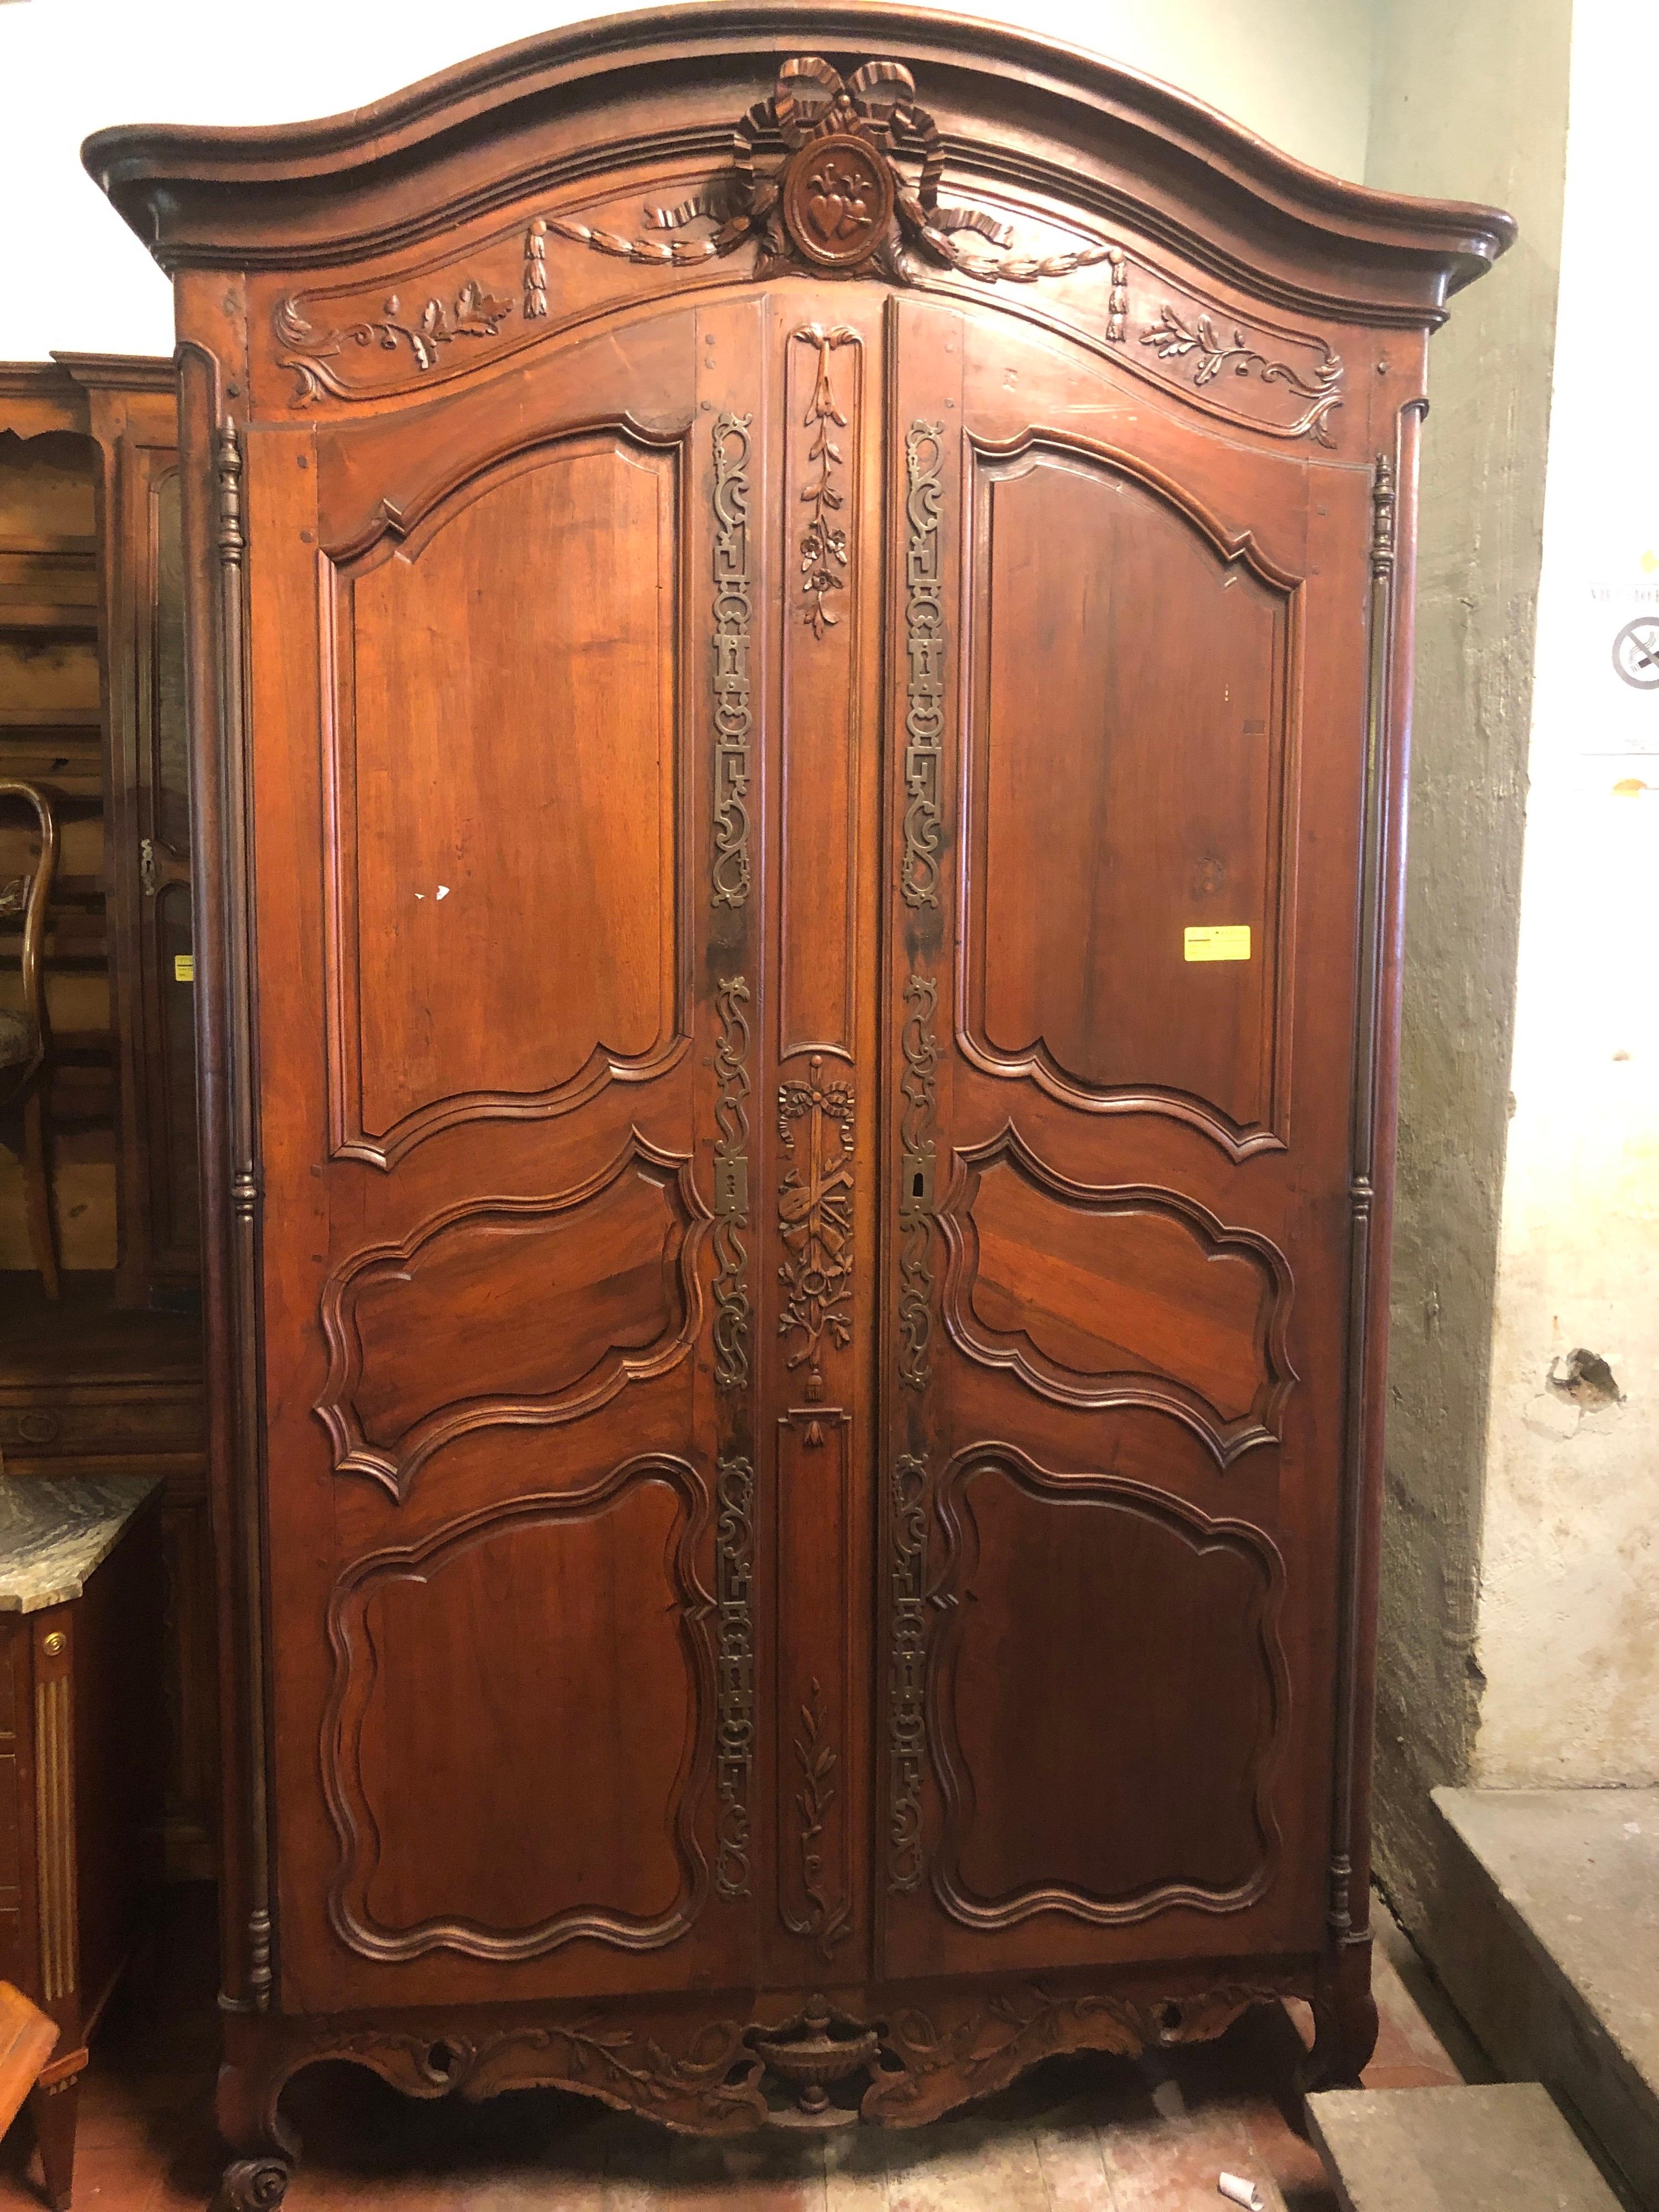 Credenzas Provenzale wardrobe, of incredible workmanship, original hardware and of great workmanship. Carved walnut furniture, fantastic the love bow that embraces two choirs on the top of the hat. The base also has a fine carving. We are faced with